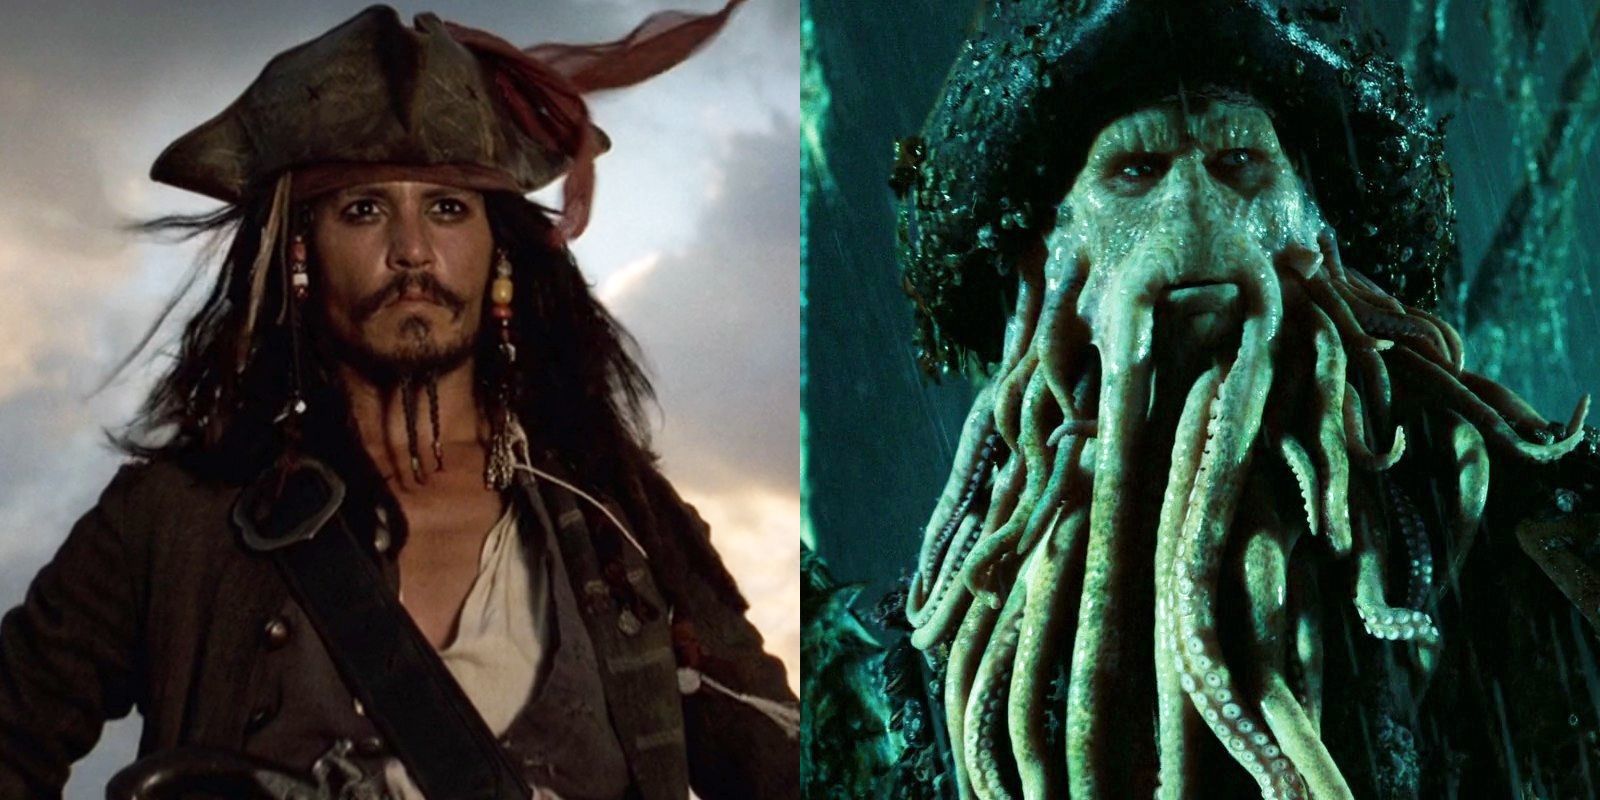 Captain Jack Sparrow and Davy Jones in Pirates of the Caribbean